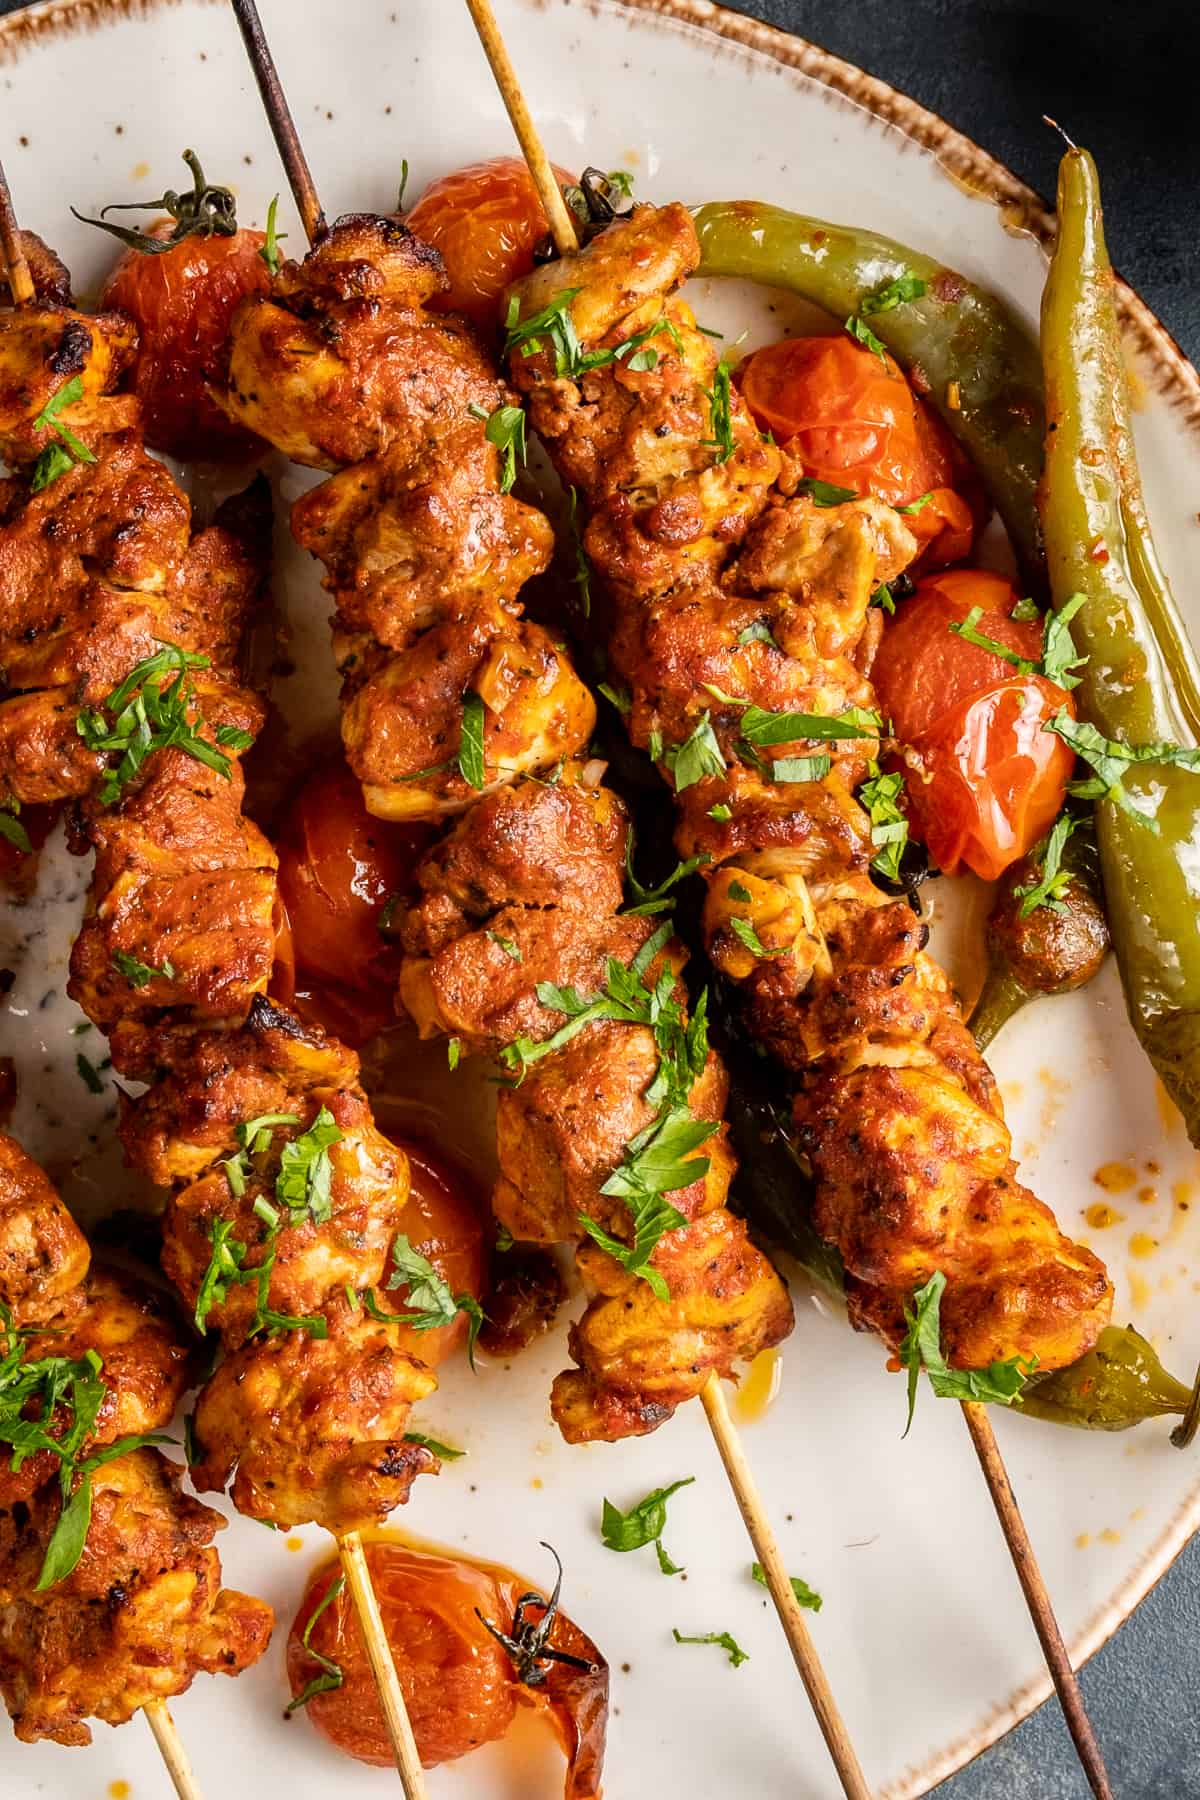 Chicken shish kebabs garnished with chopped parsley and roasted tomatoes and peppers.